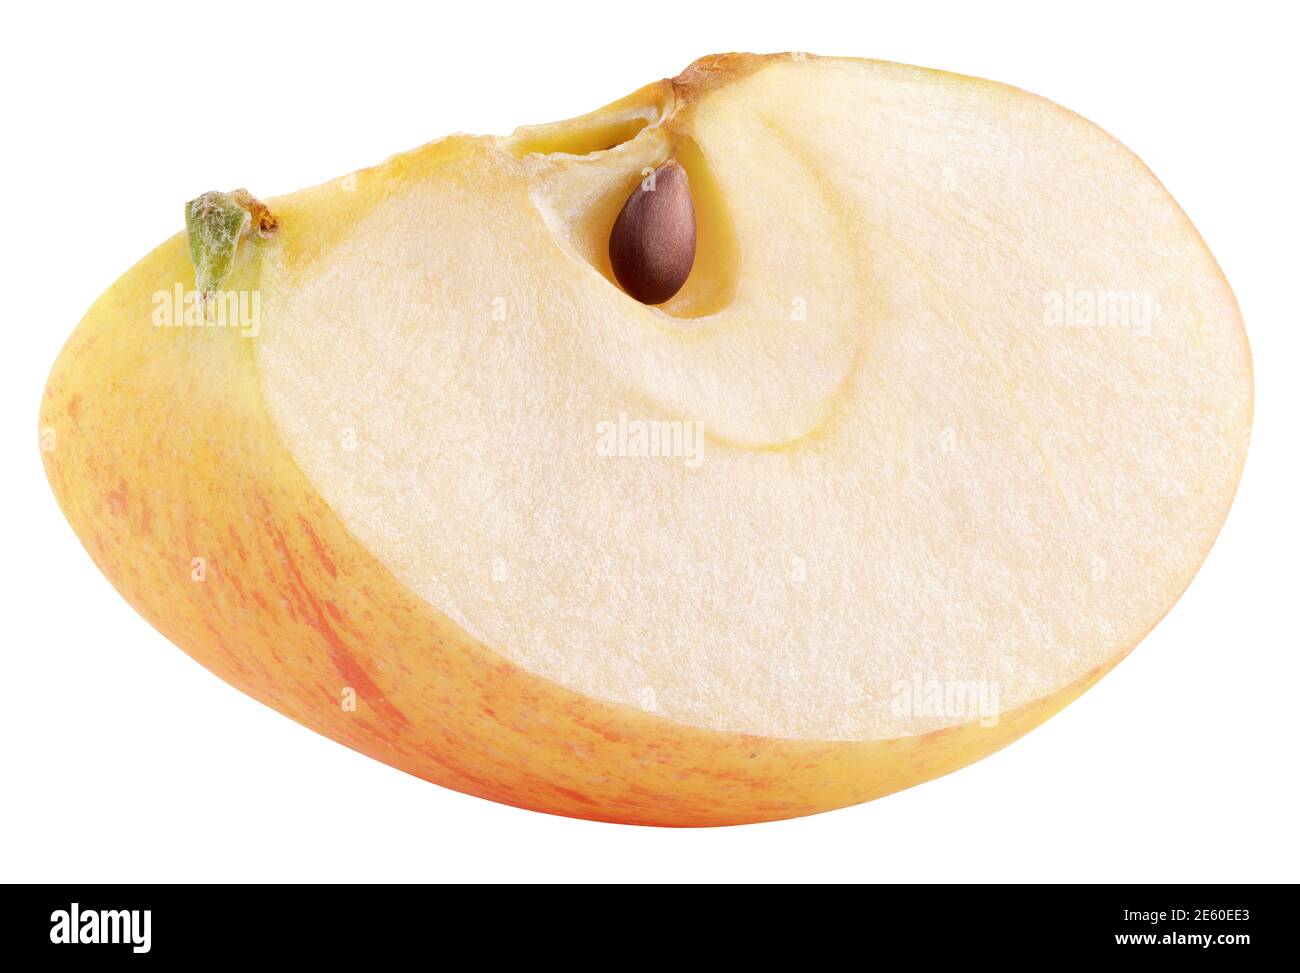 Slice of red yellow apple fruit isolated on white background. Red apple wedge with seed. Full Depth of Field Stock Photo